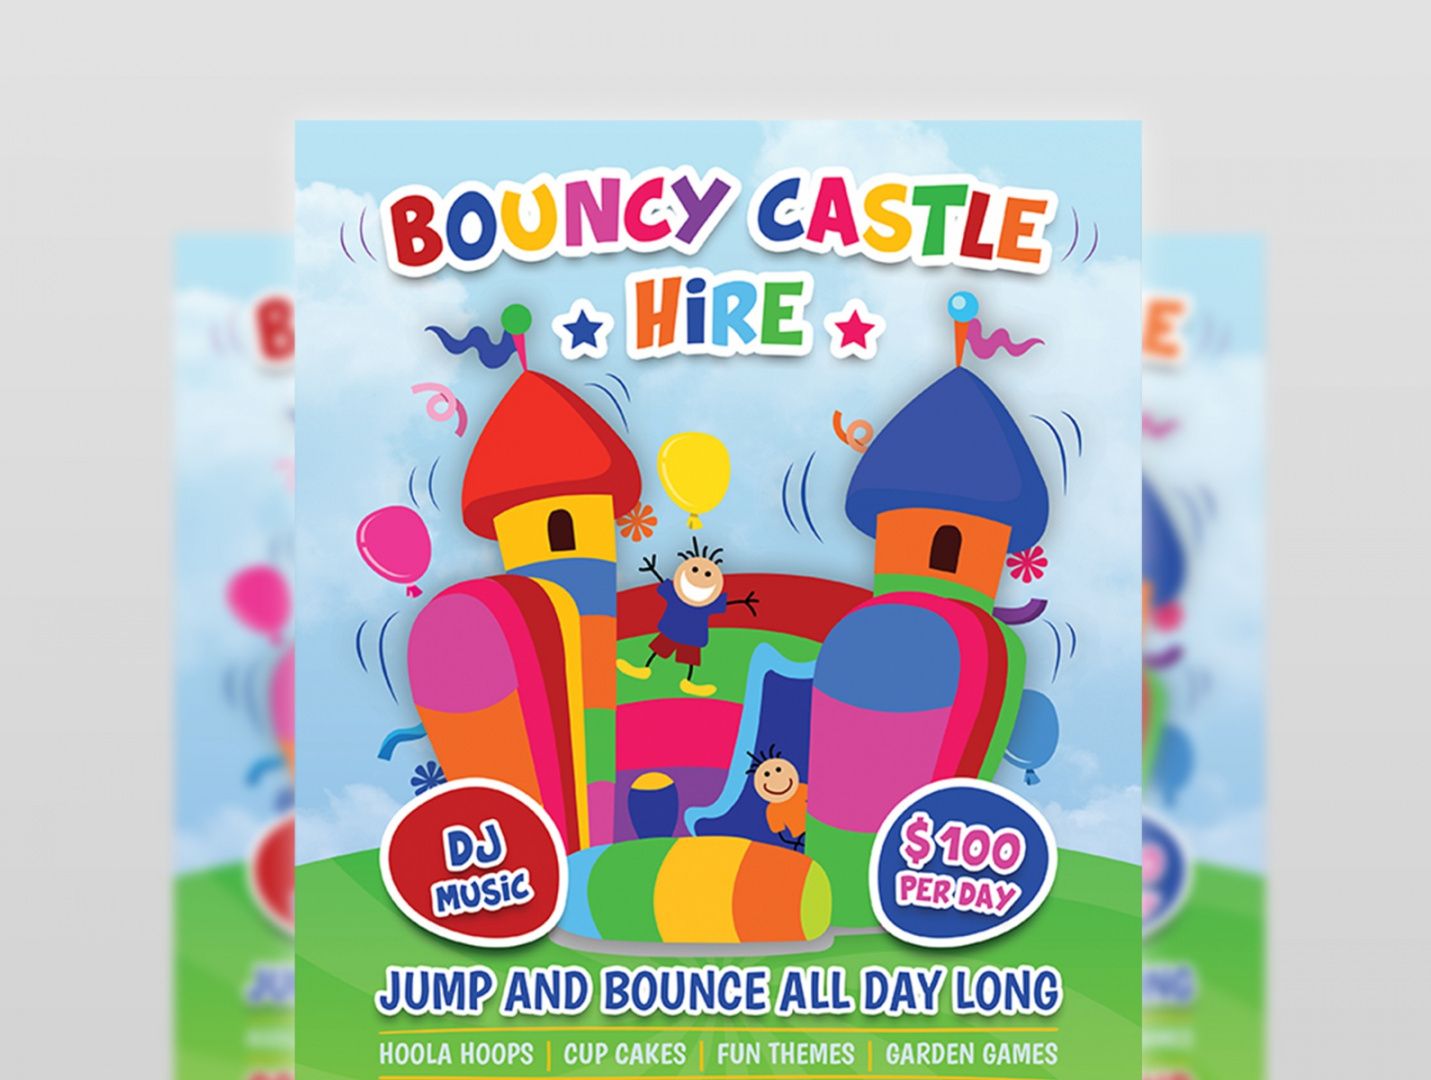 bouncy castle hire flyer template by owpictures on dribbble bounce house flyer template doc